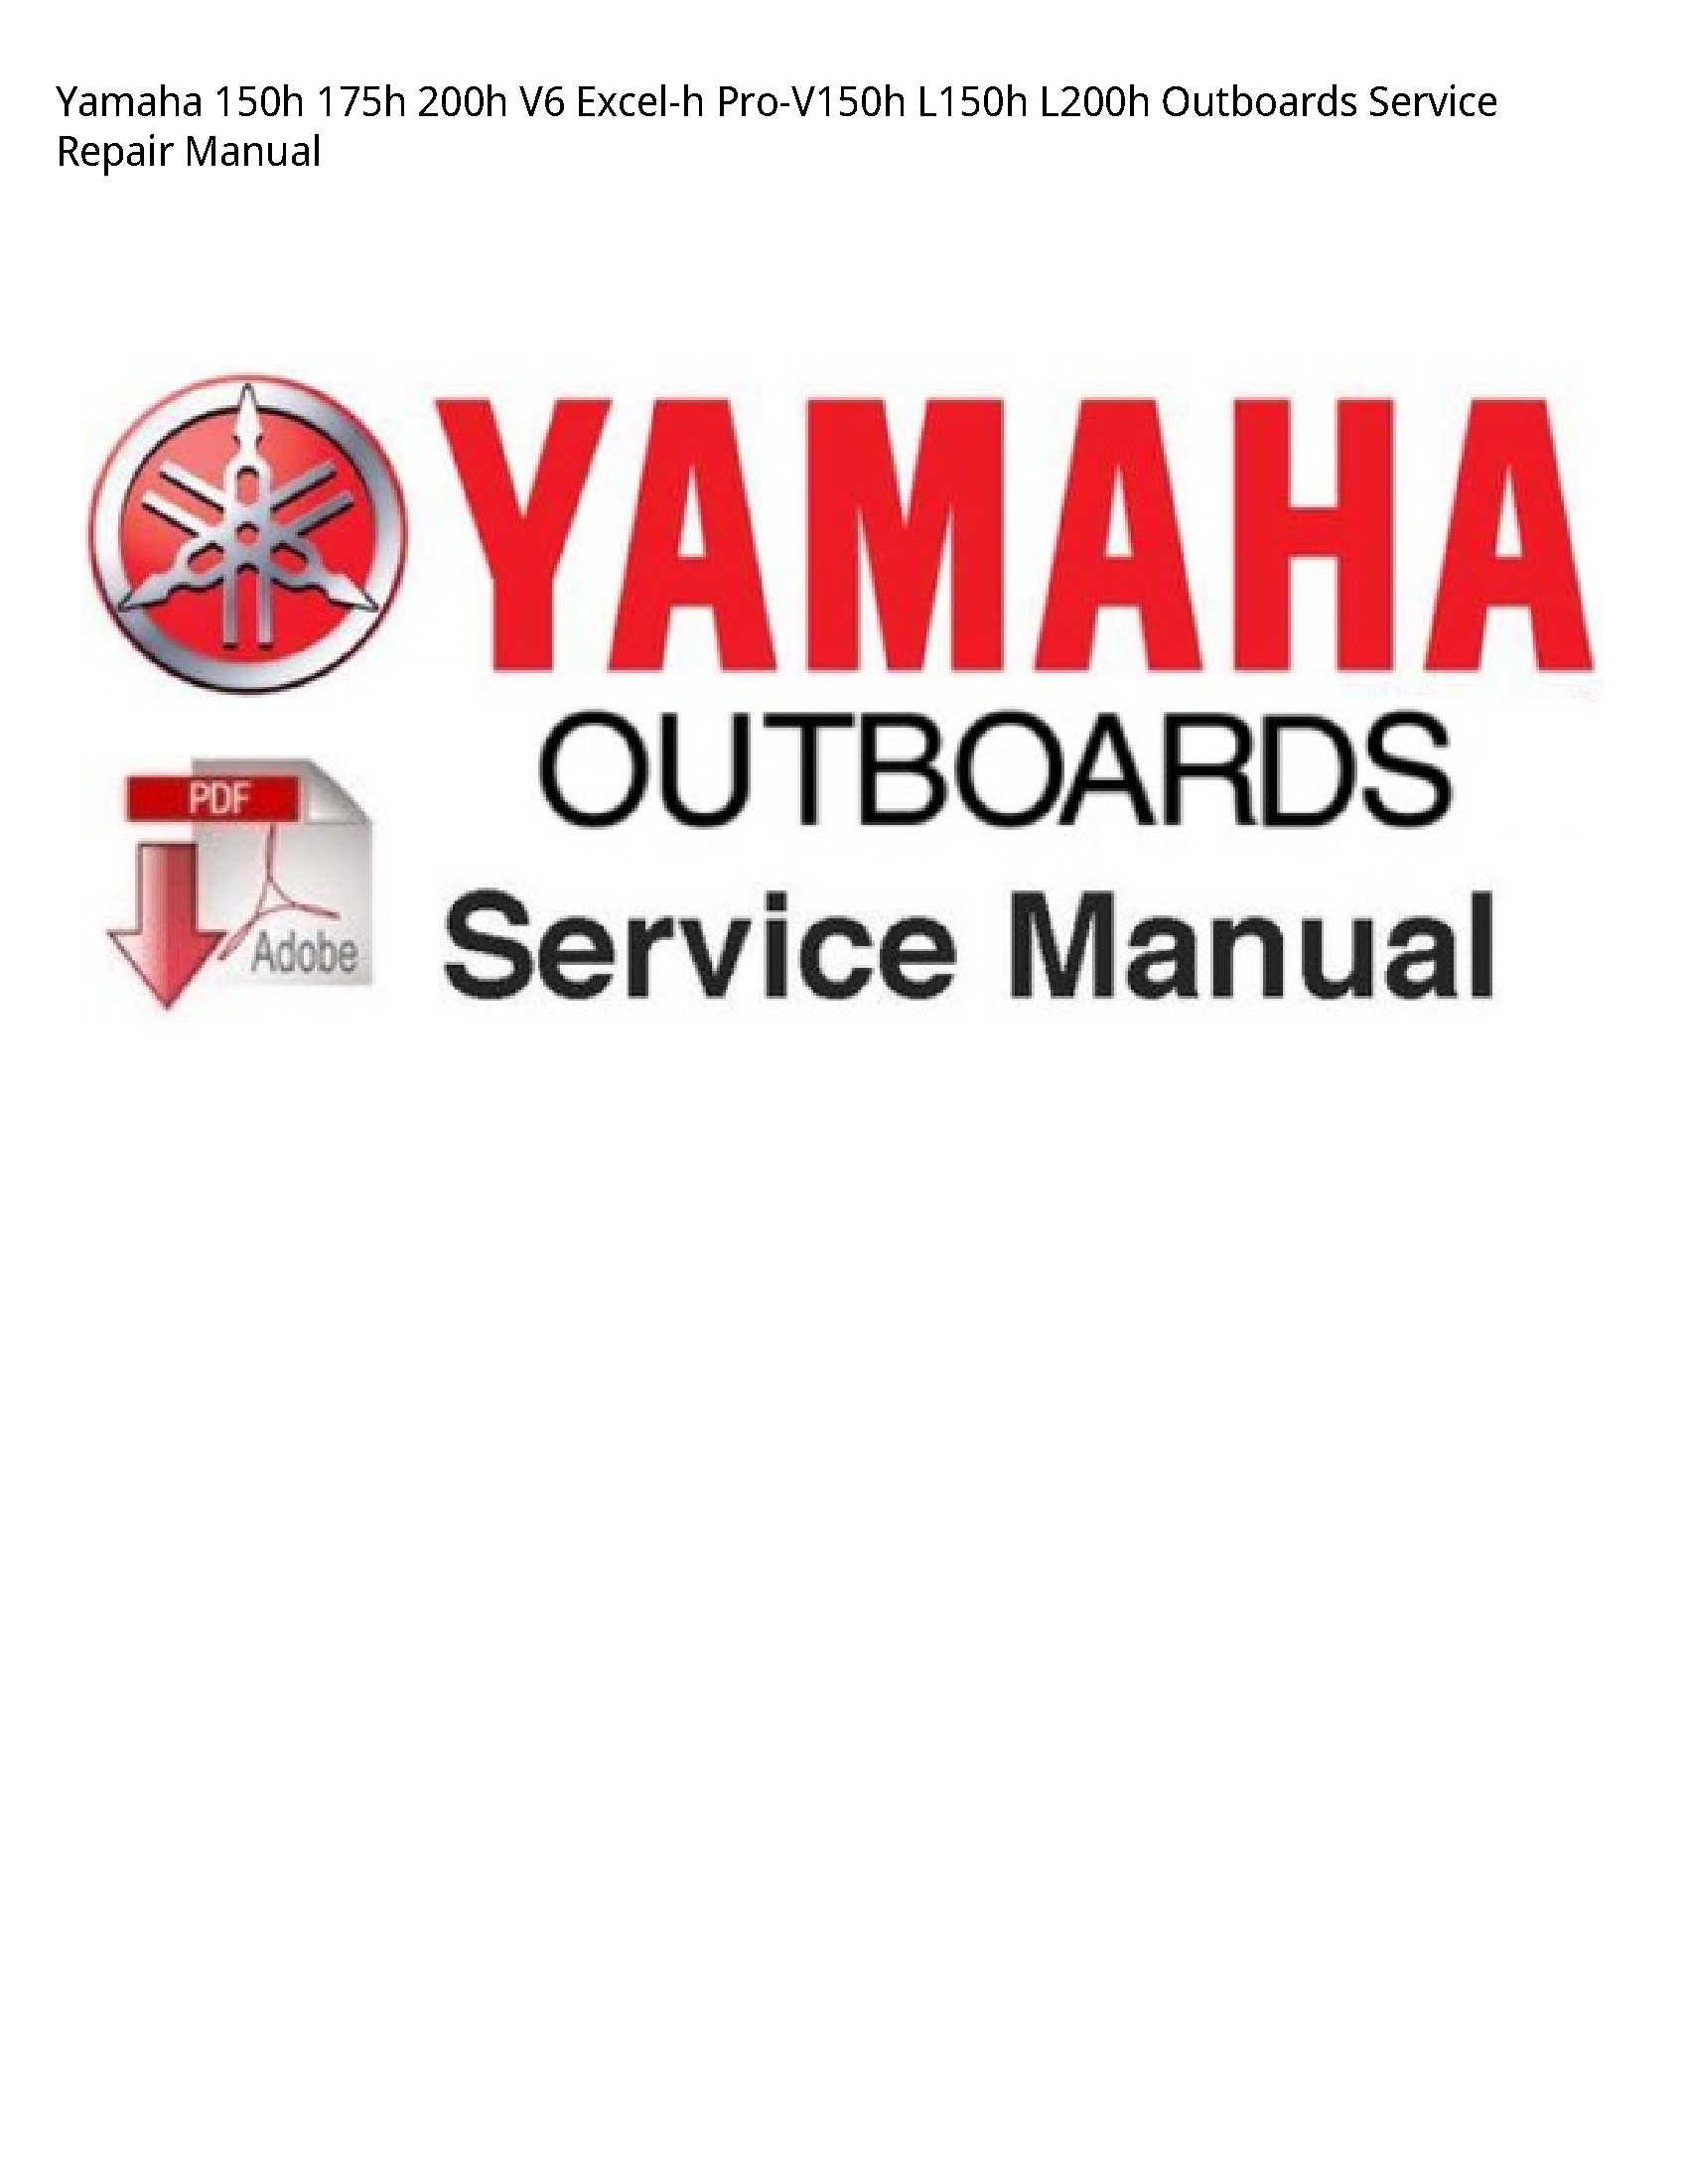 Yamaha 150h Excel-h Outboards manual